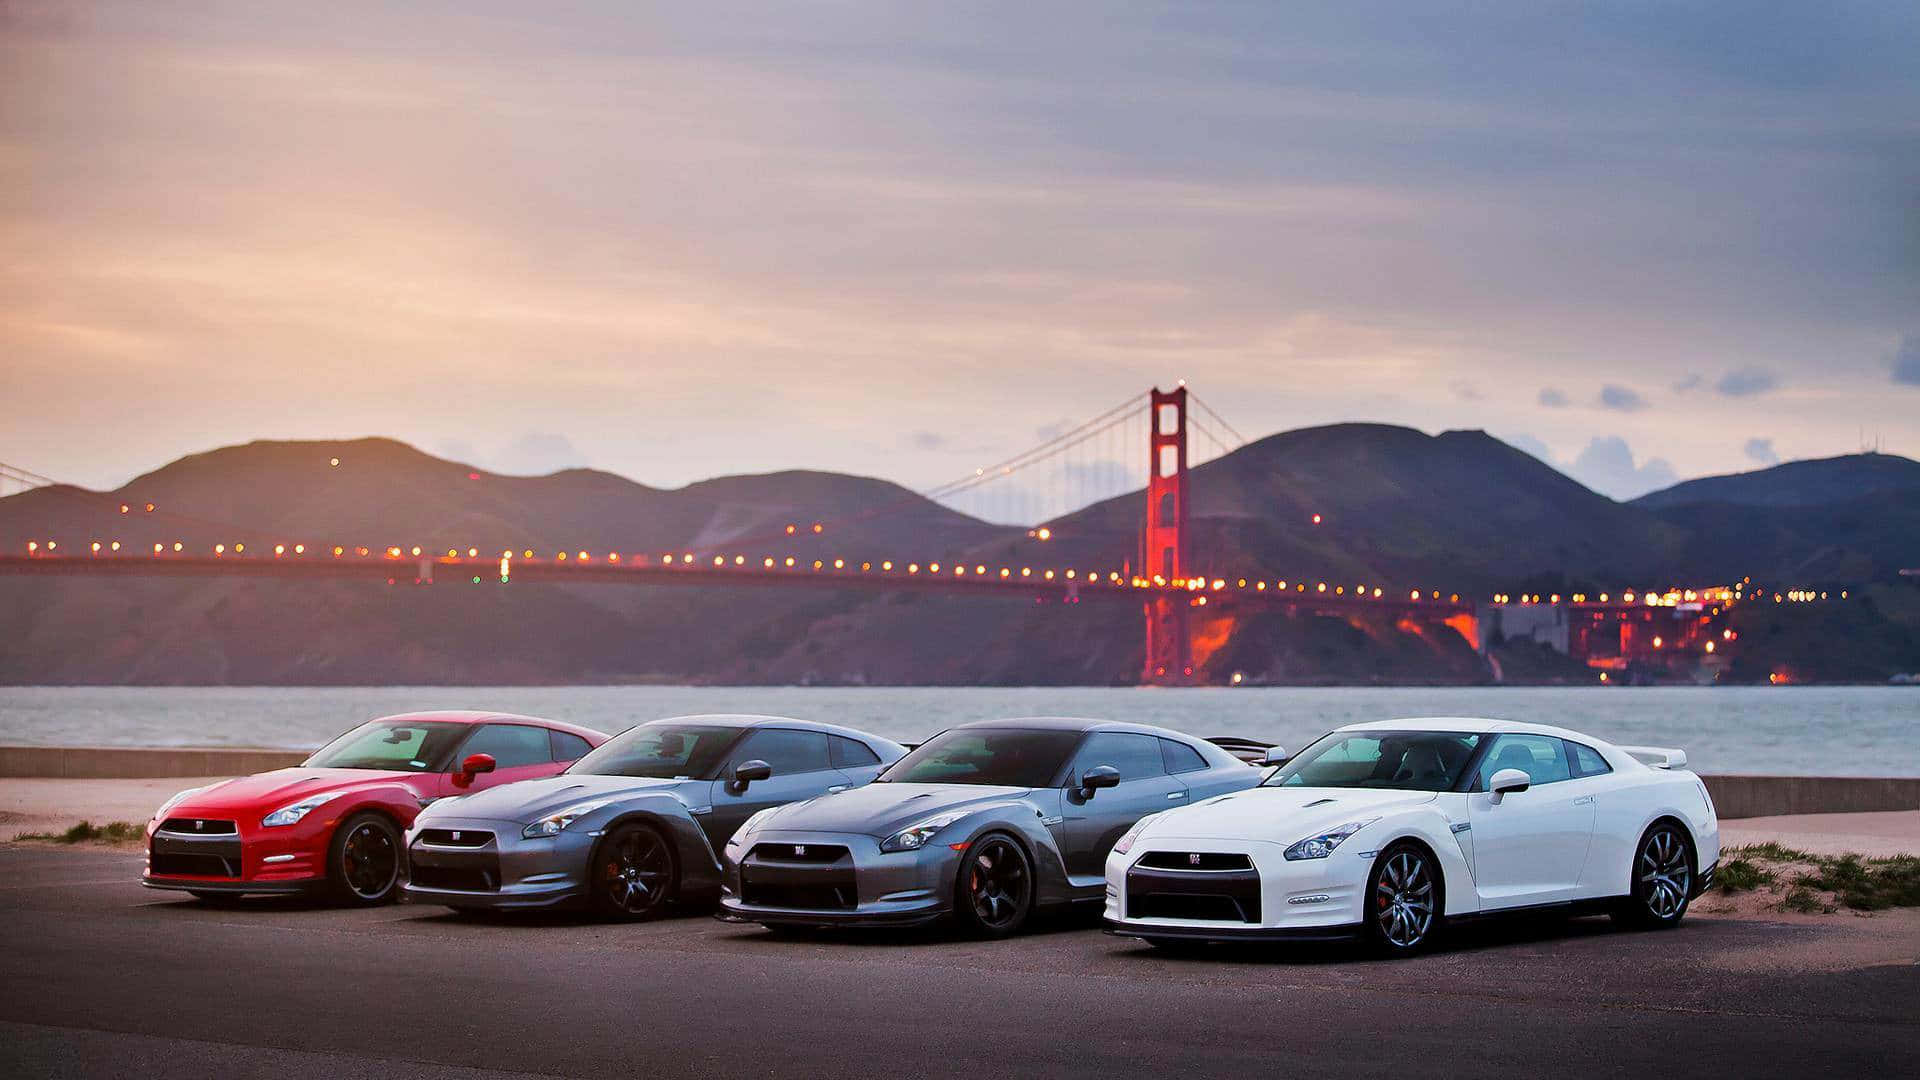 Power And Style: The Cool Gtr Background